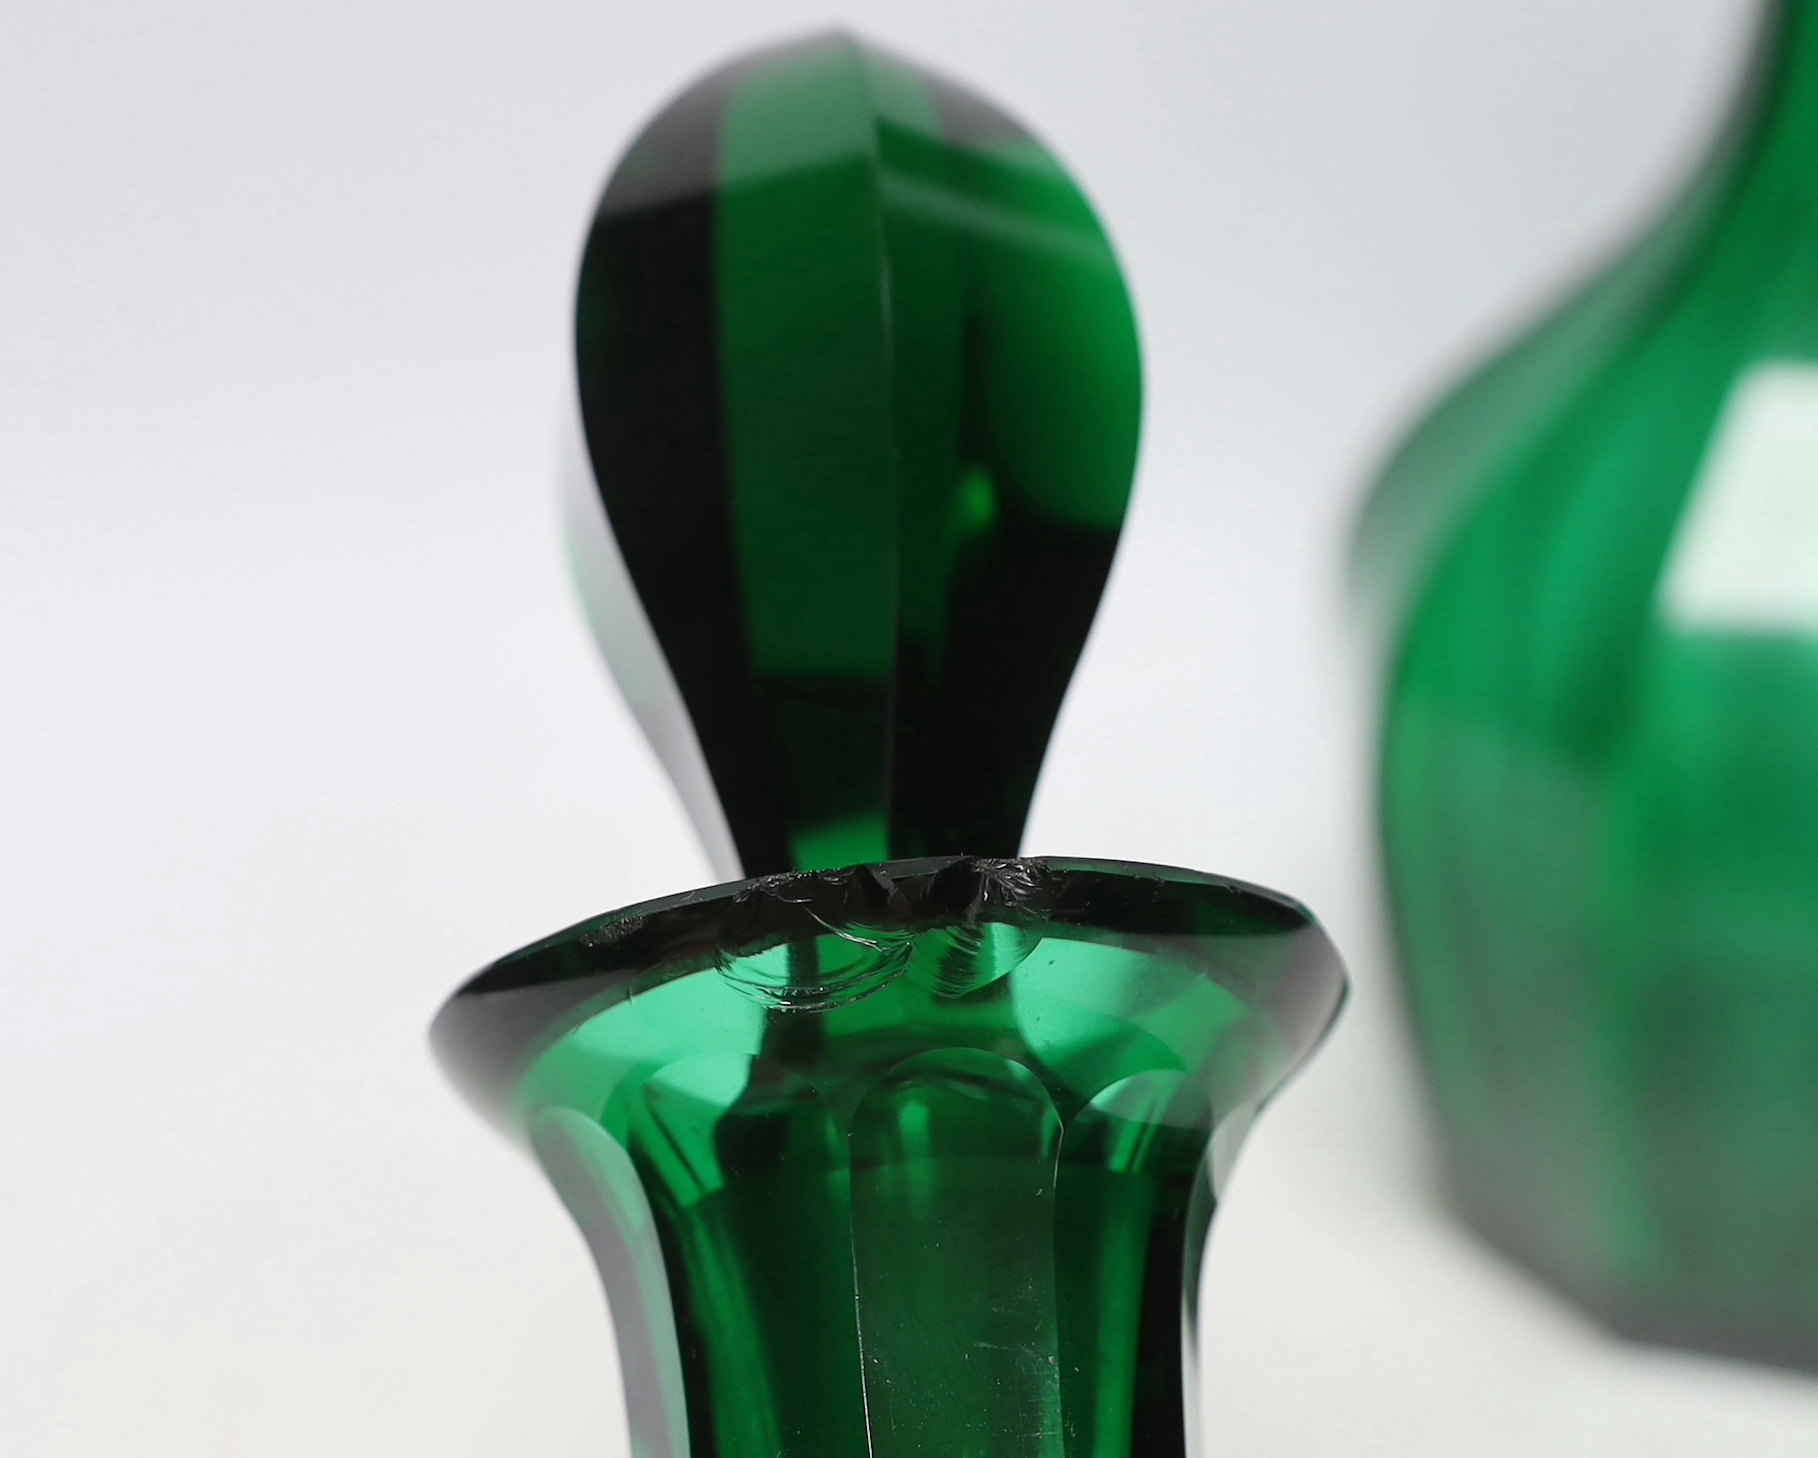 A pair of 19th century green glass decanters with stoppers, 34cm high